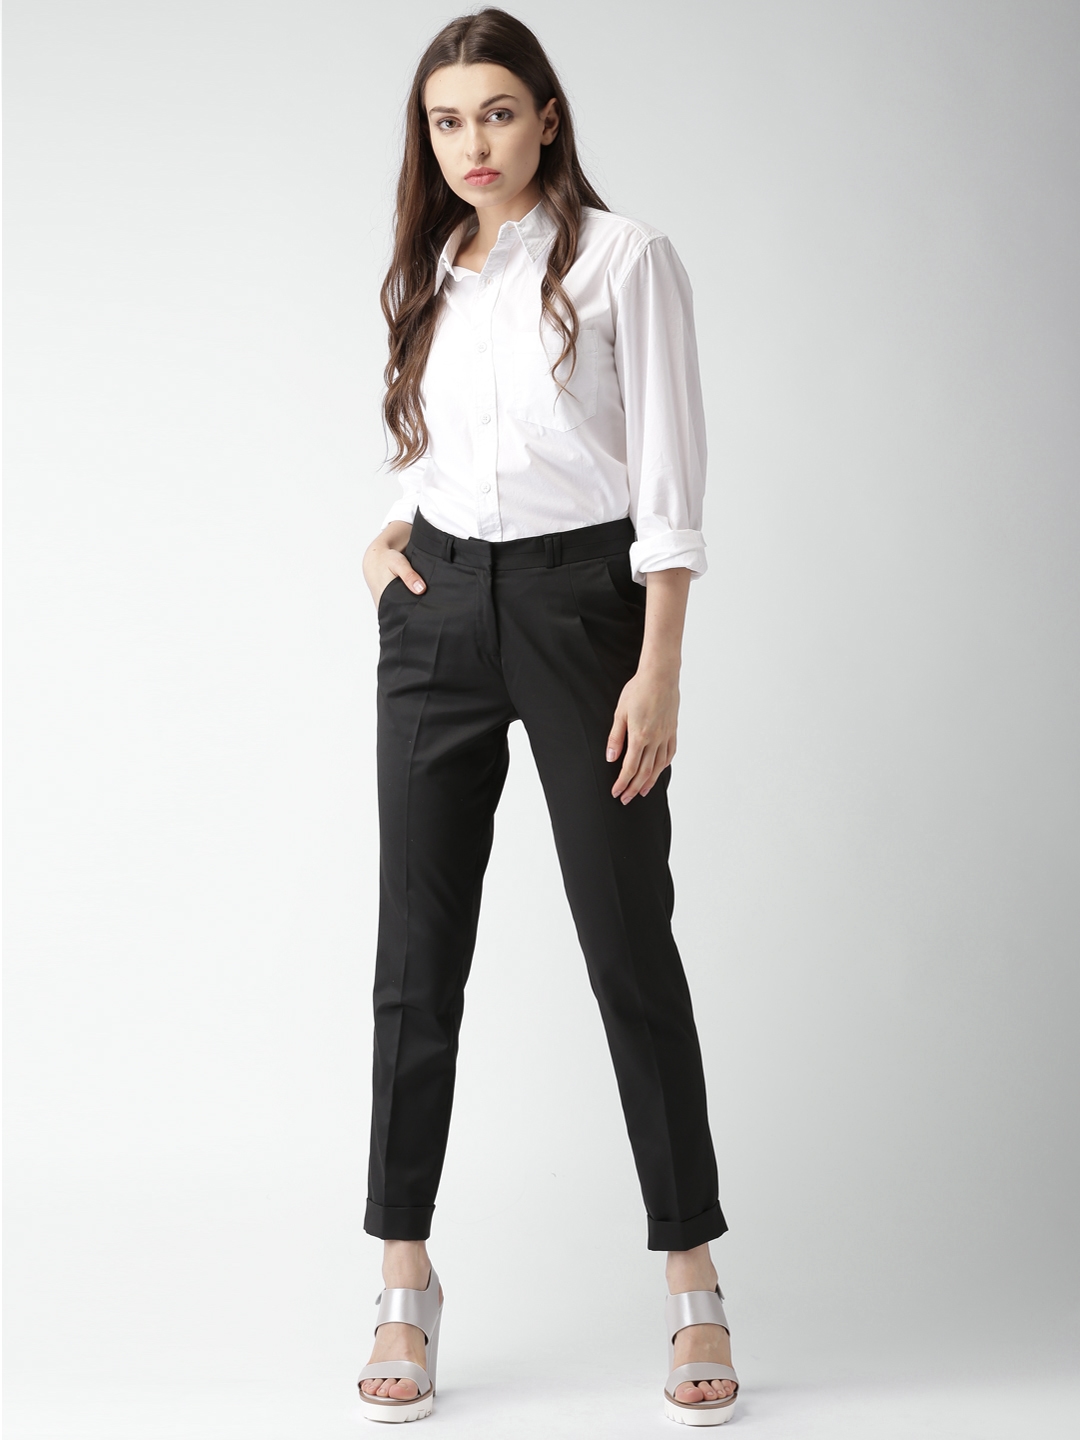 Update more than 149 formal pants for women latest